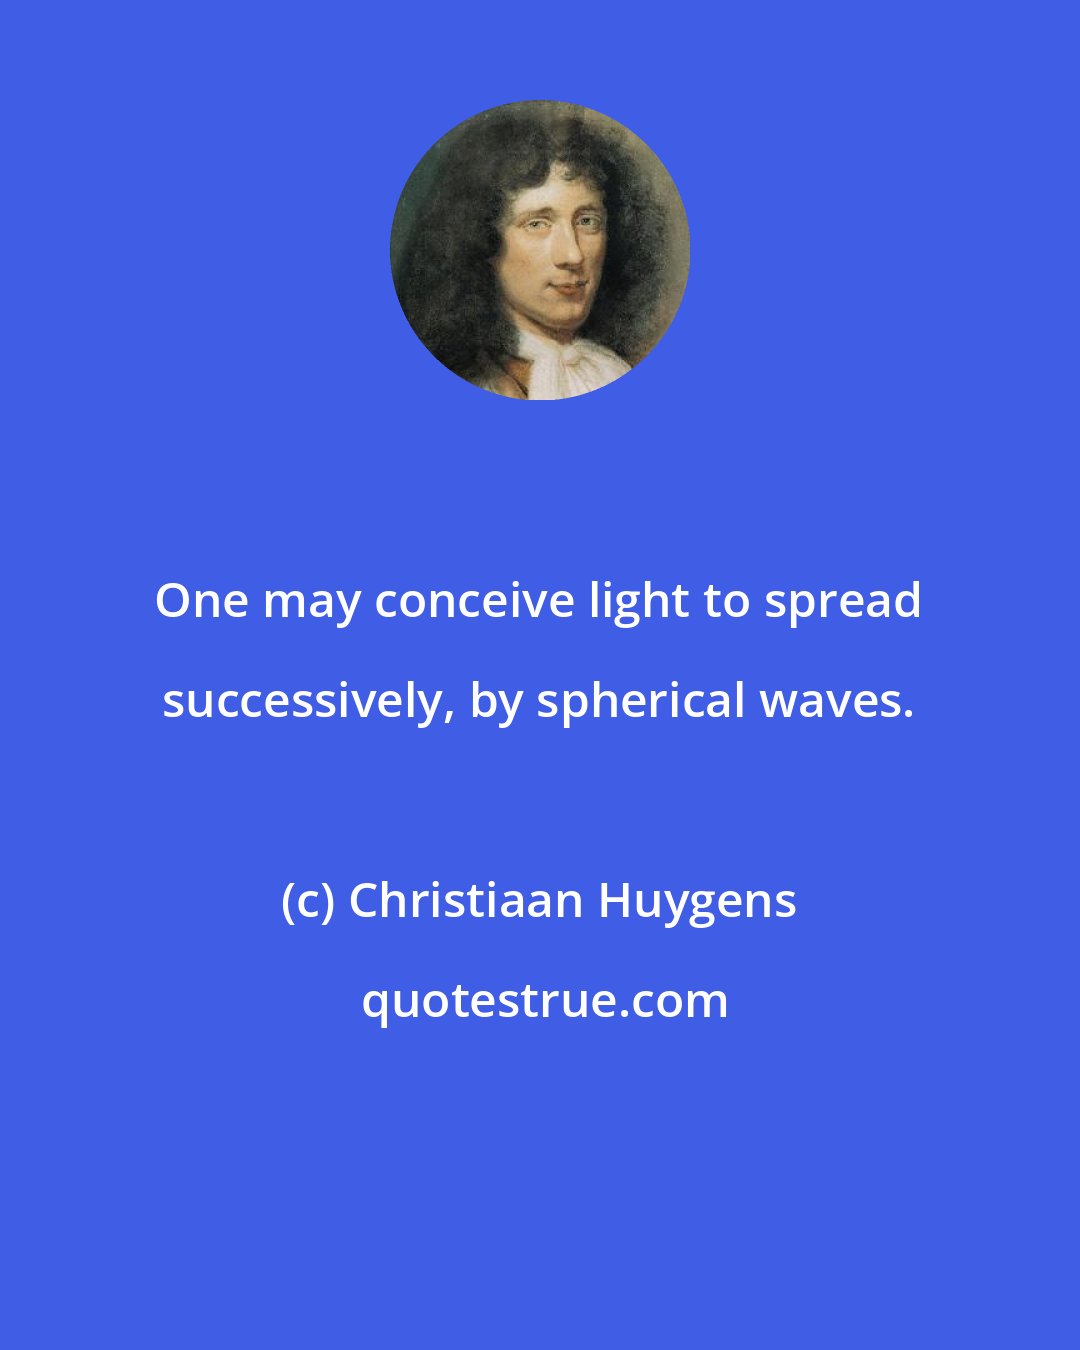 Christiaan Huygens: One may conceive light to spread successively, by spherical waves.